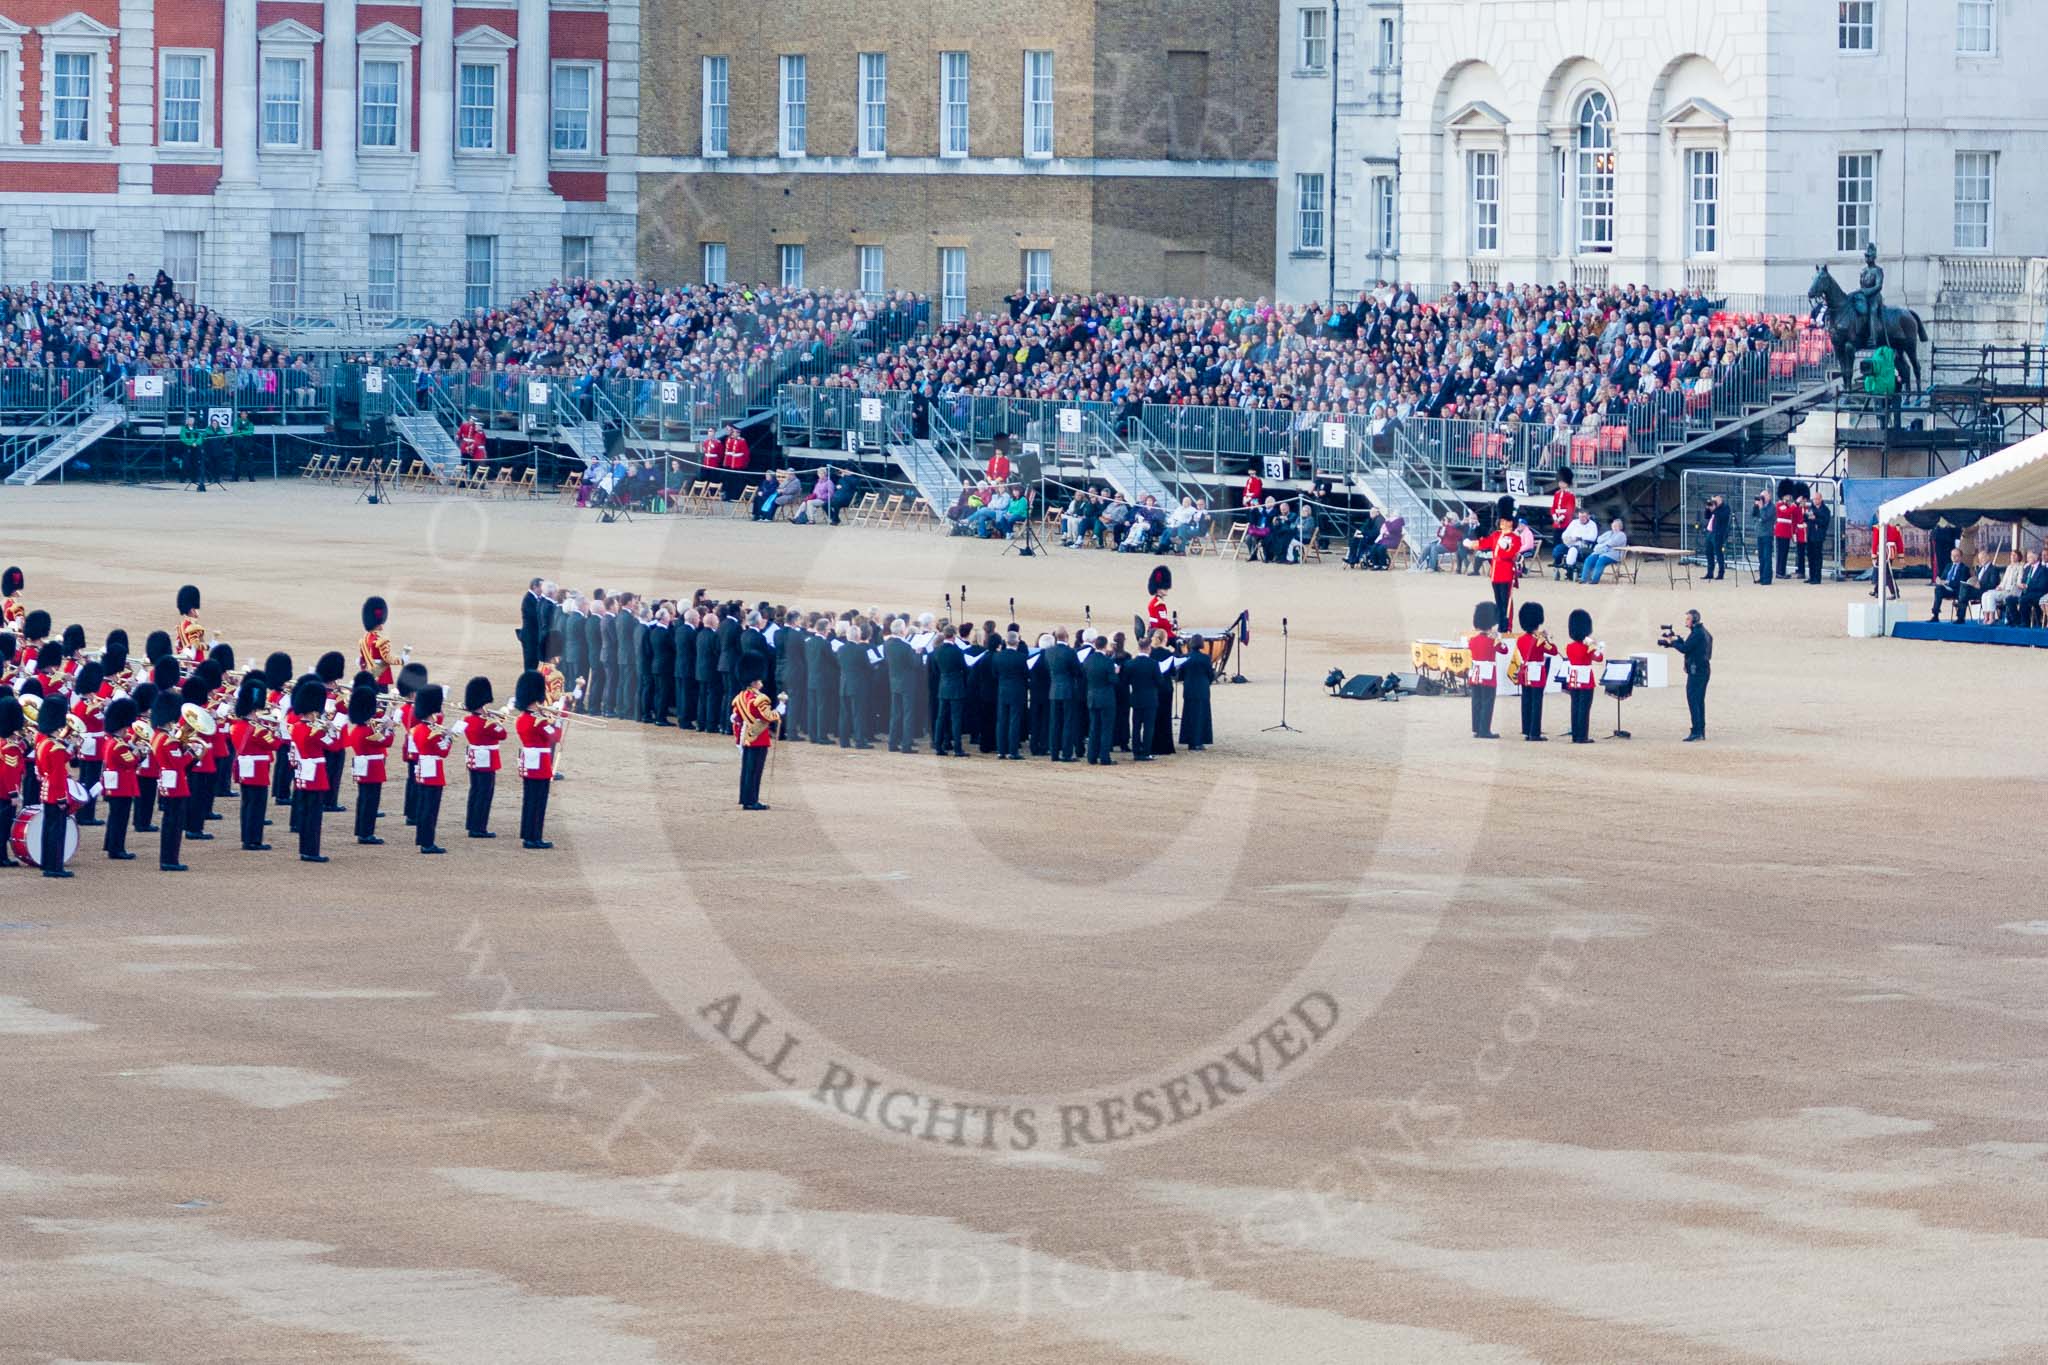 Beating Retreat 2015 - Waterloo 200.
Horse Guards Parade, Westminster,
London,

United Kingdom,
on 10 June 2015 at 20:32, image #126